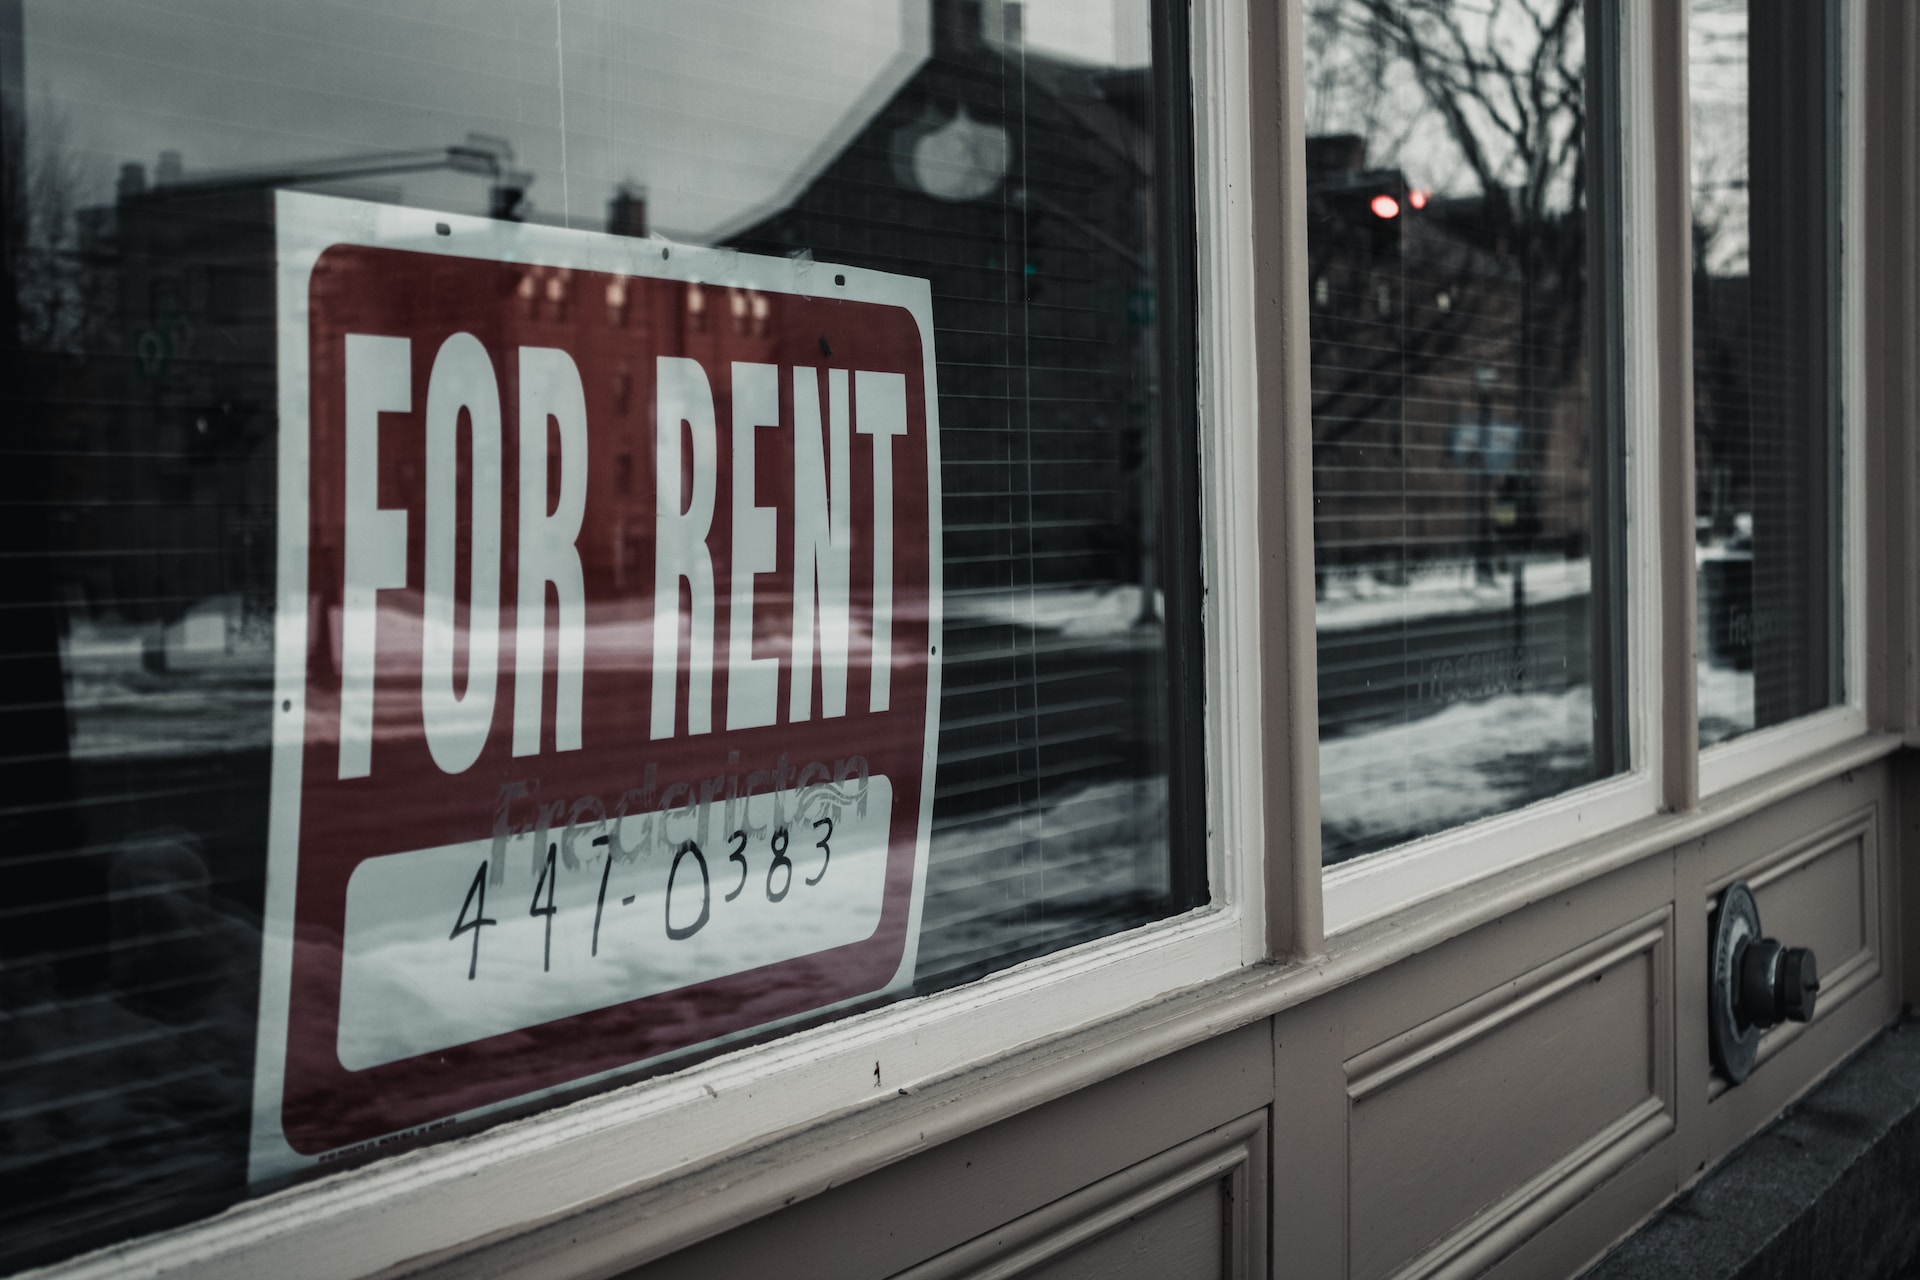 "For rent" sign in a window.